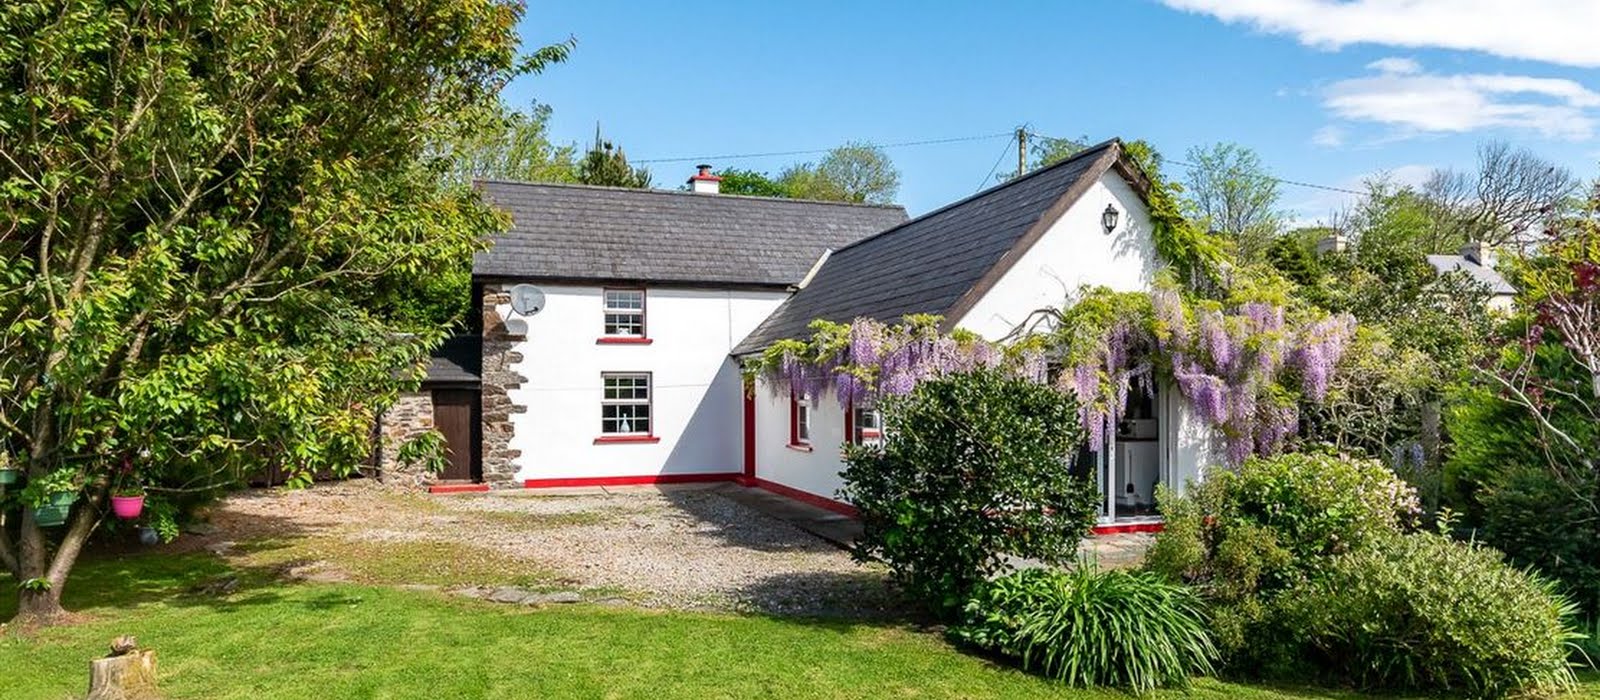 This charming wisteria-adorned cottage in Co Kerry is on the market for €239,000